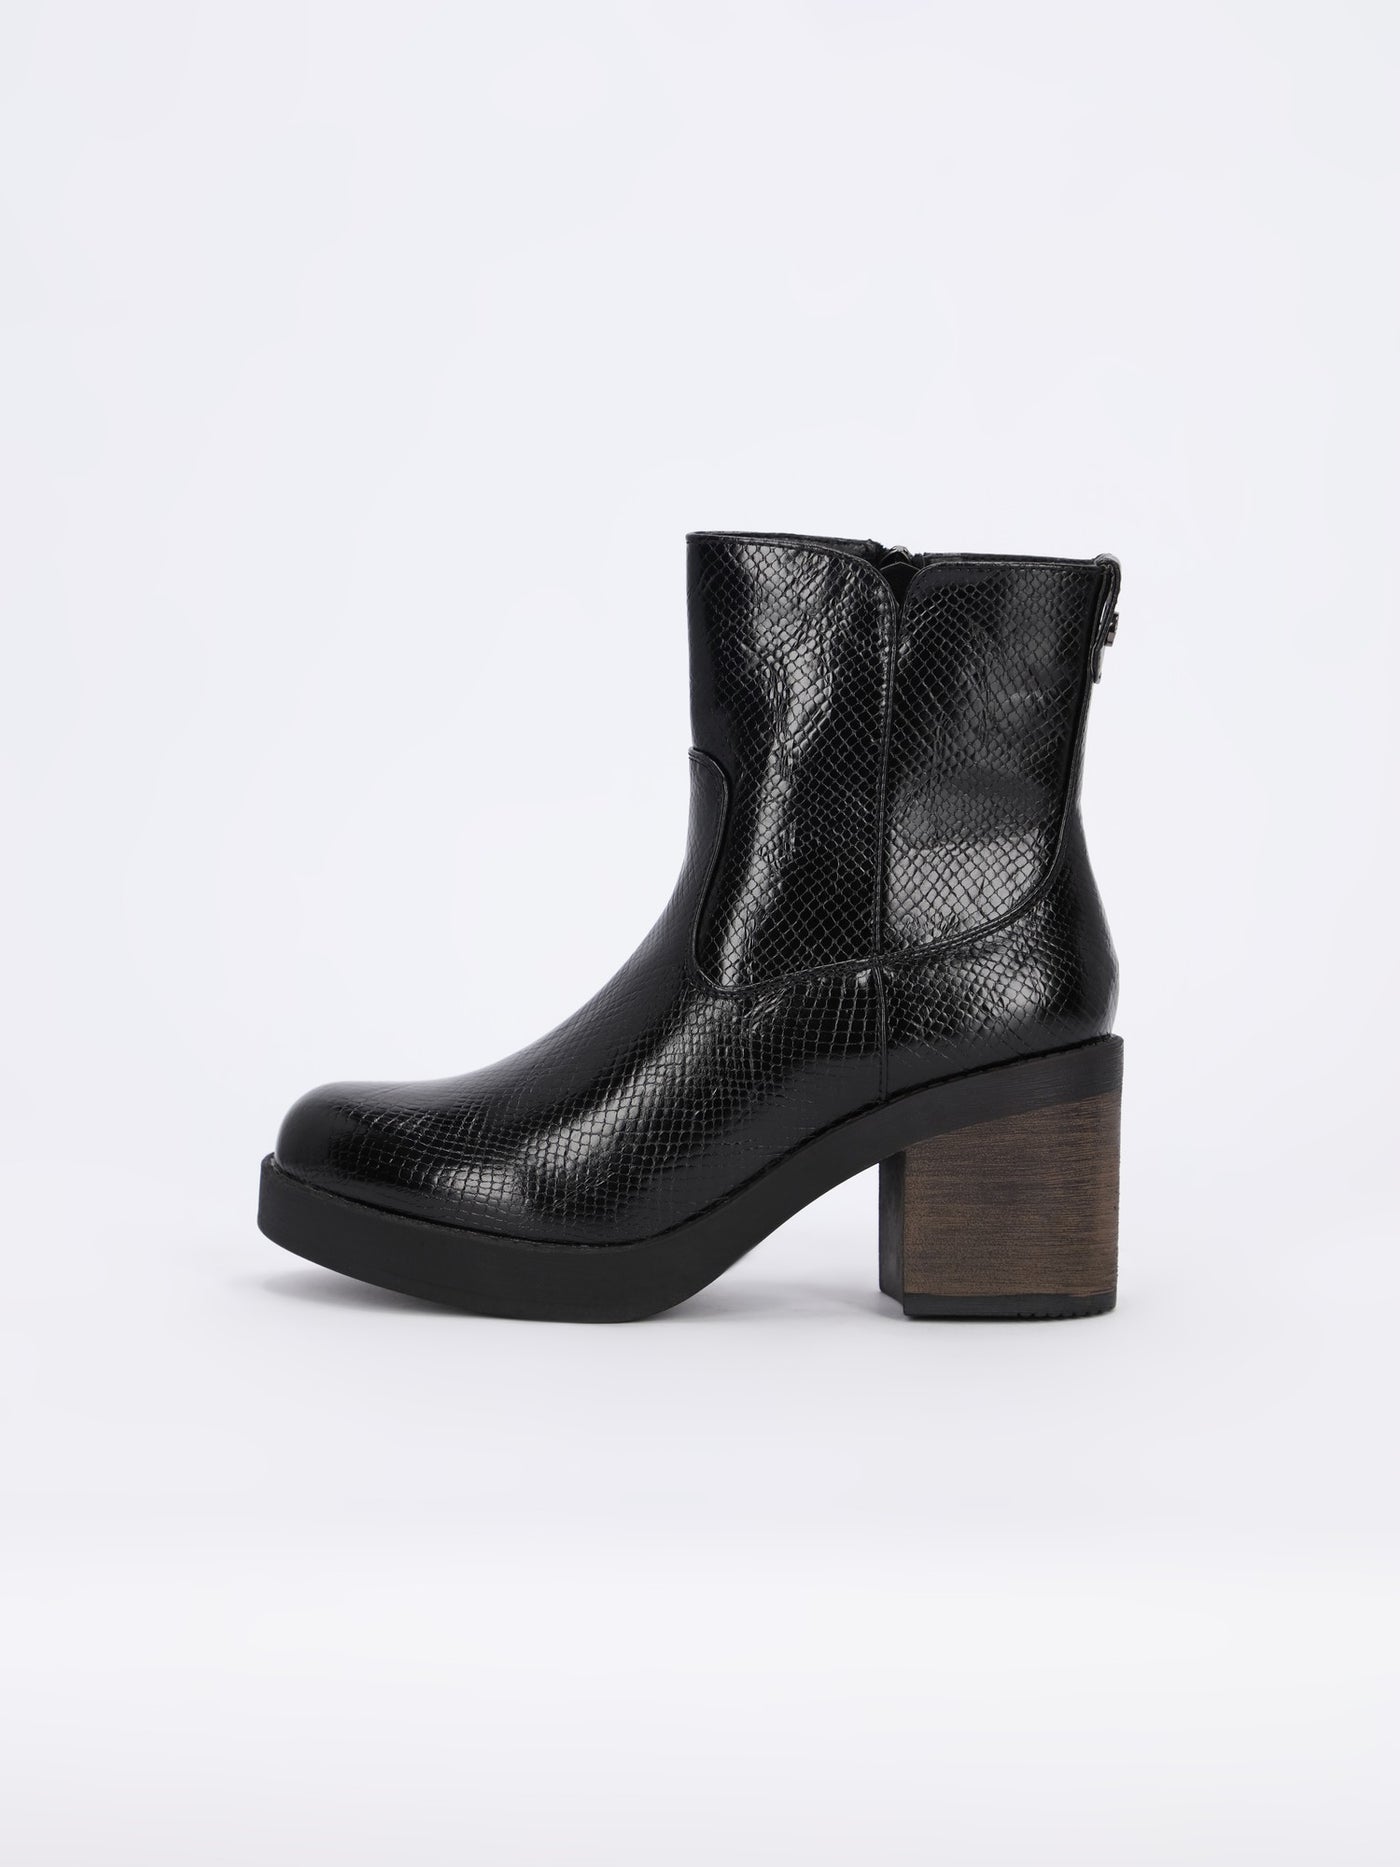 Reptile Leather Ankle Boots